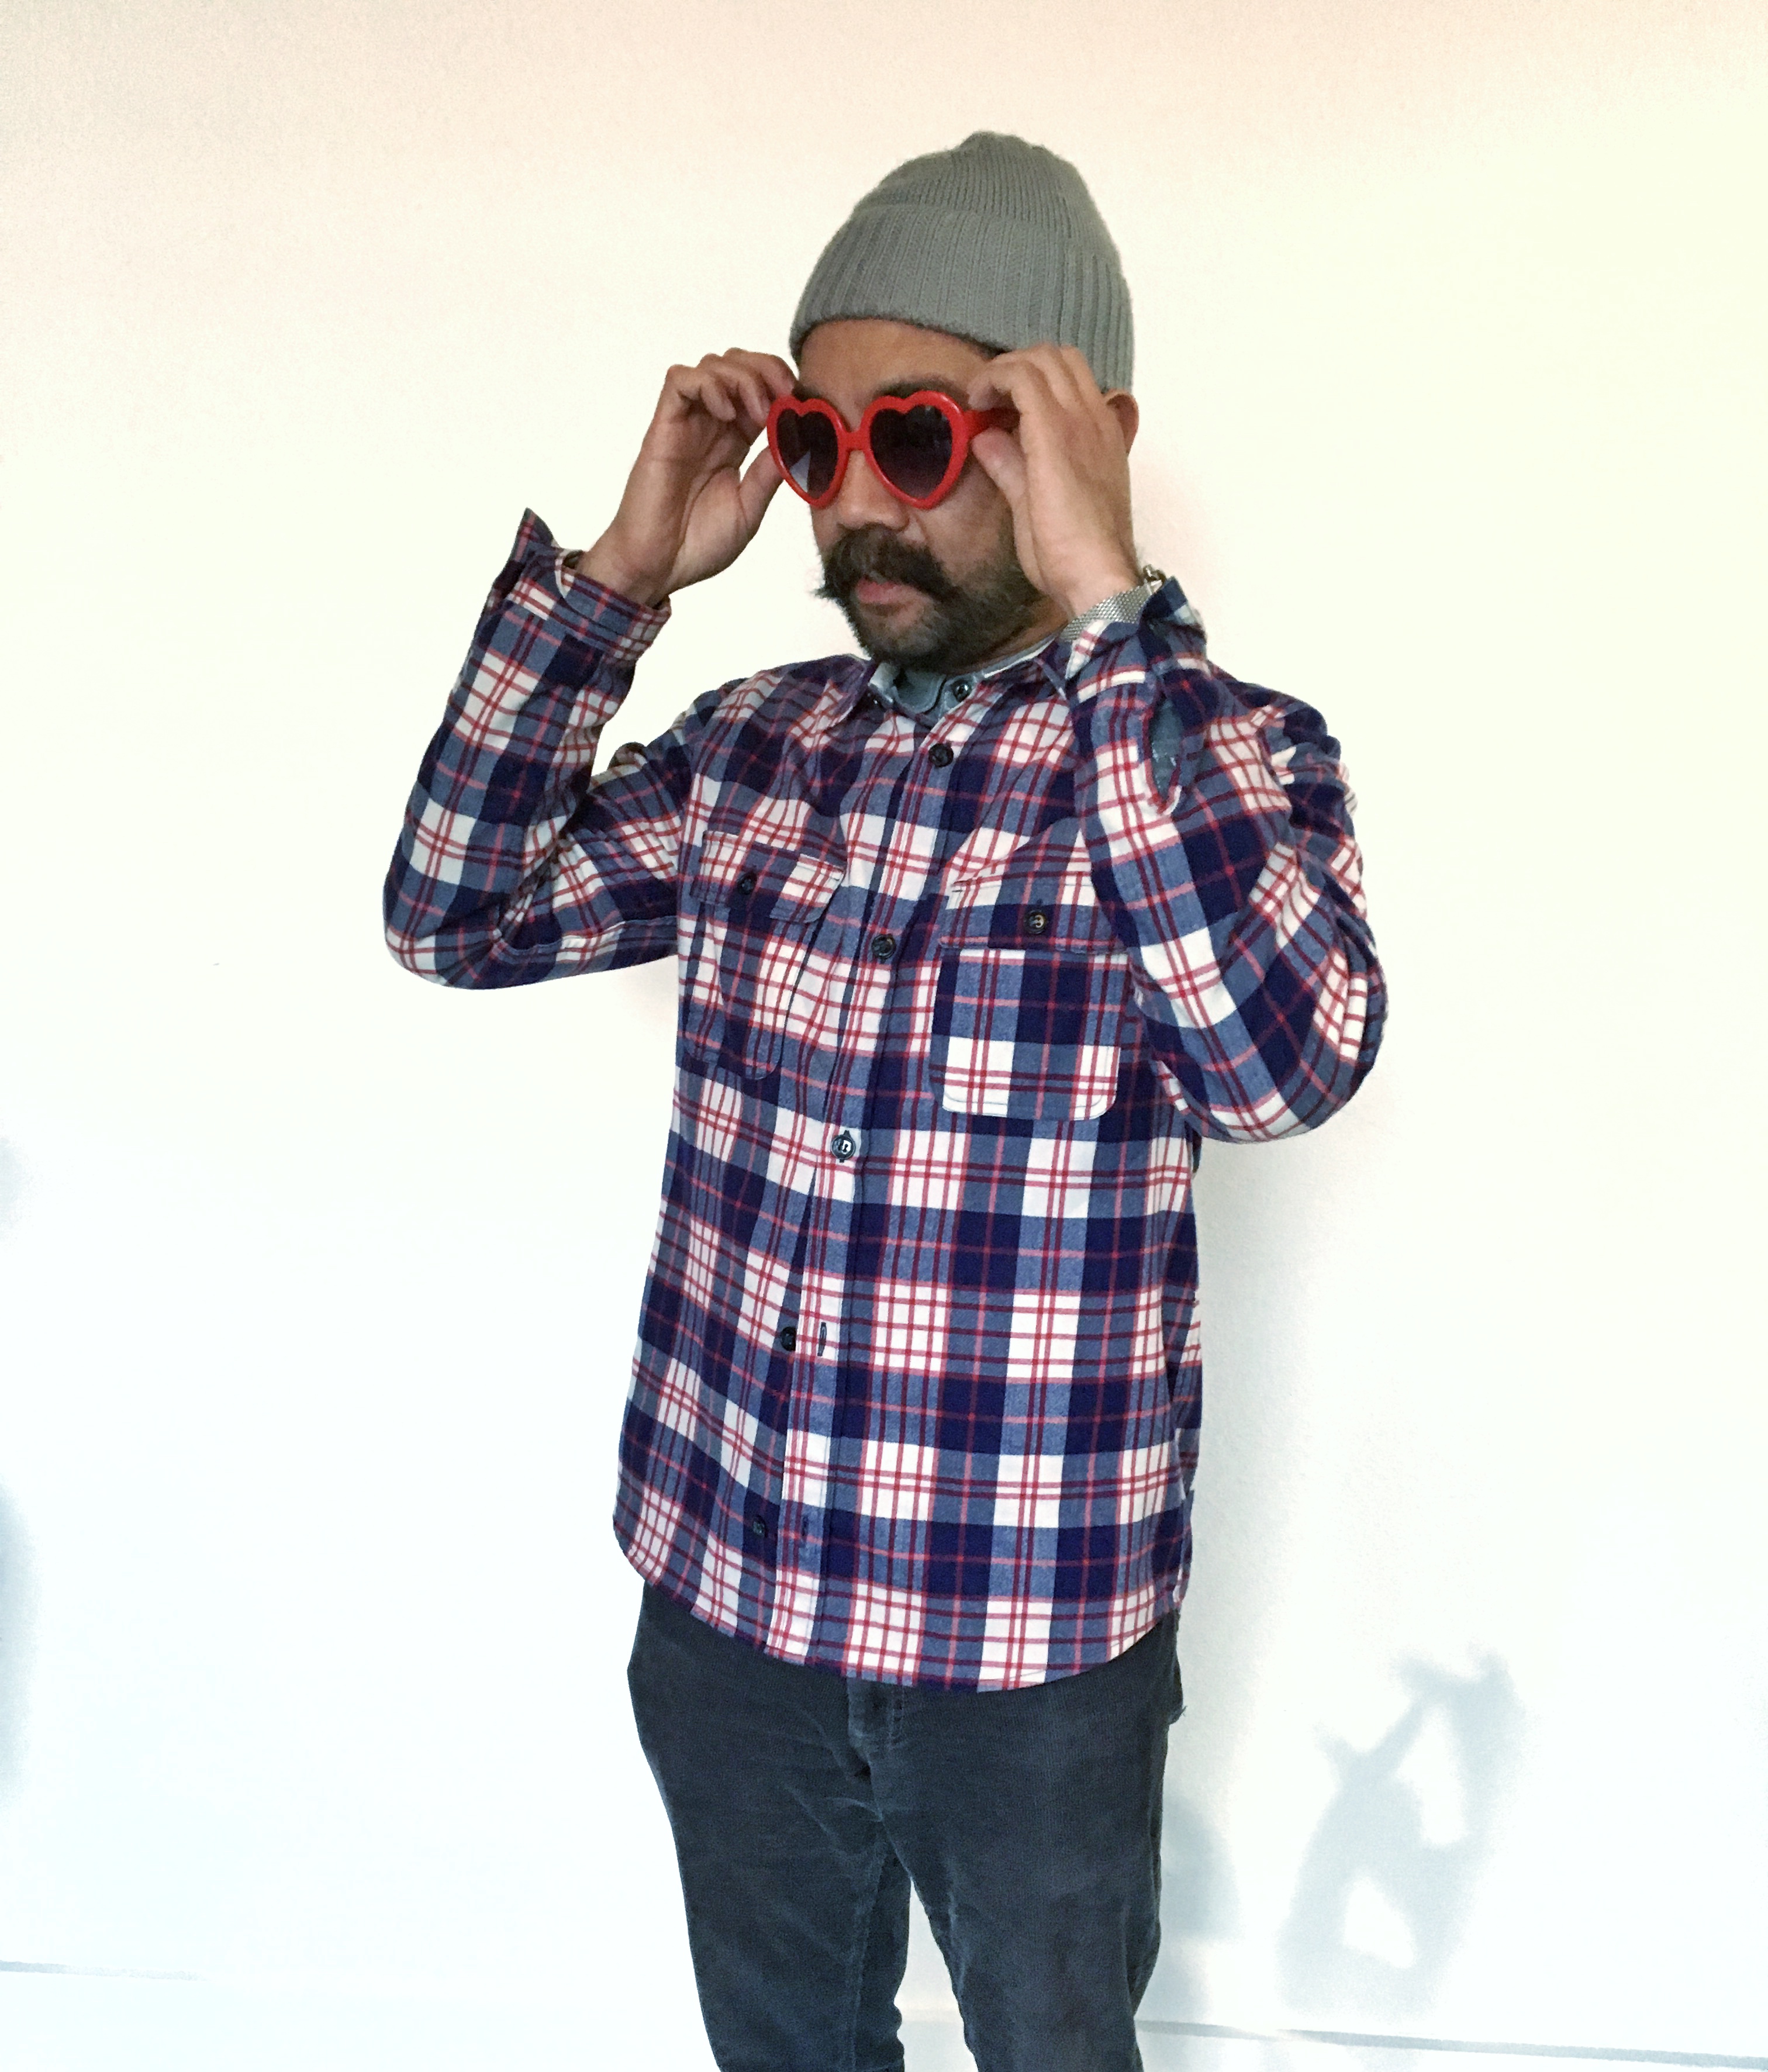 Ubiquity General Manager, Enrique Estrella, styling out in the office.